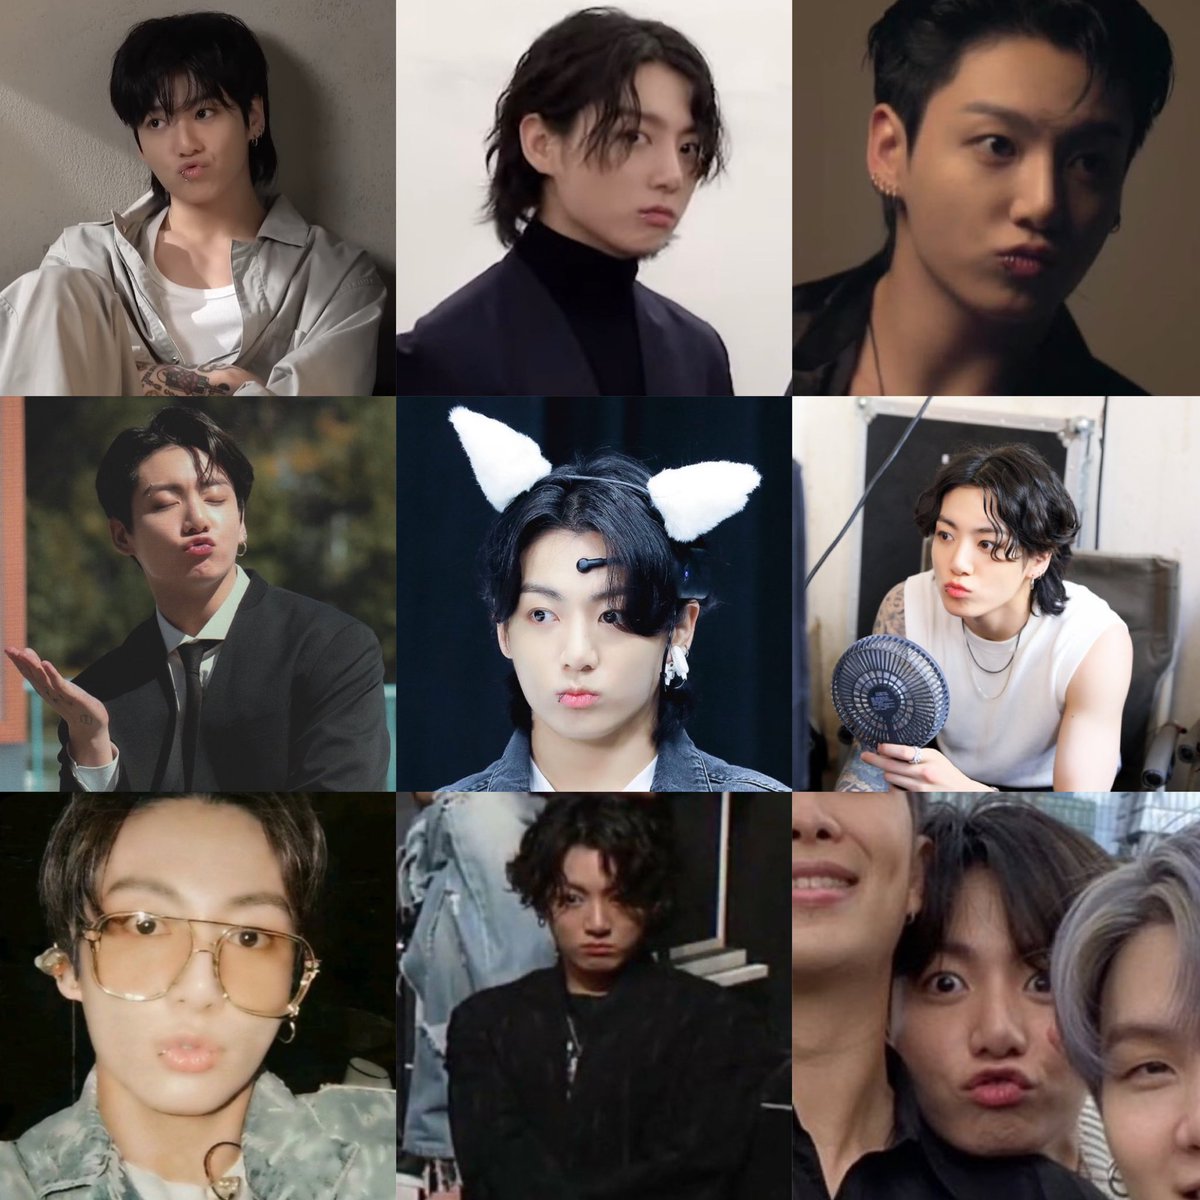 - Jungkook is born pouting 🎀😾

-or jungkook melting our hearts with his cute pout a thread 🧵